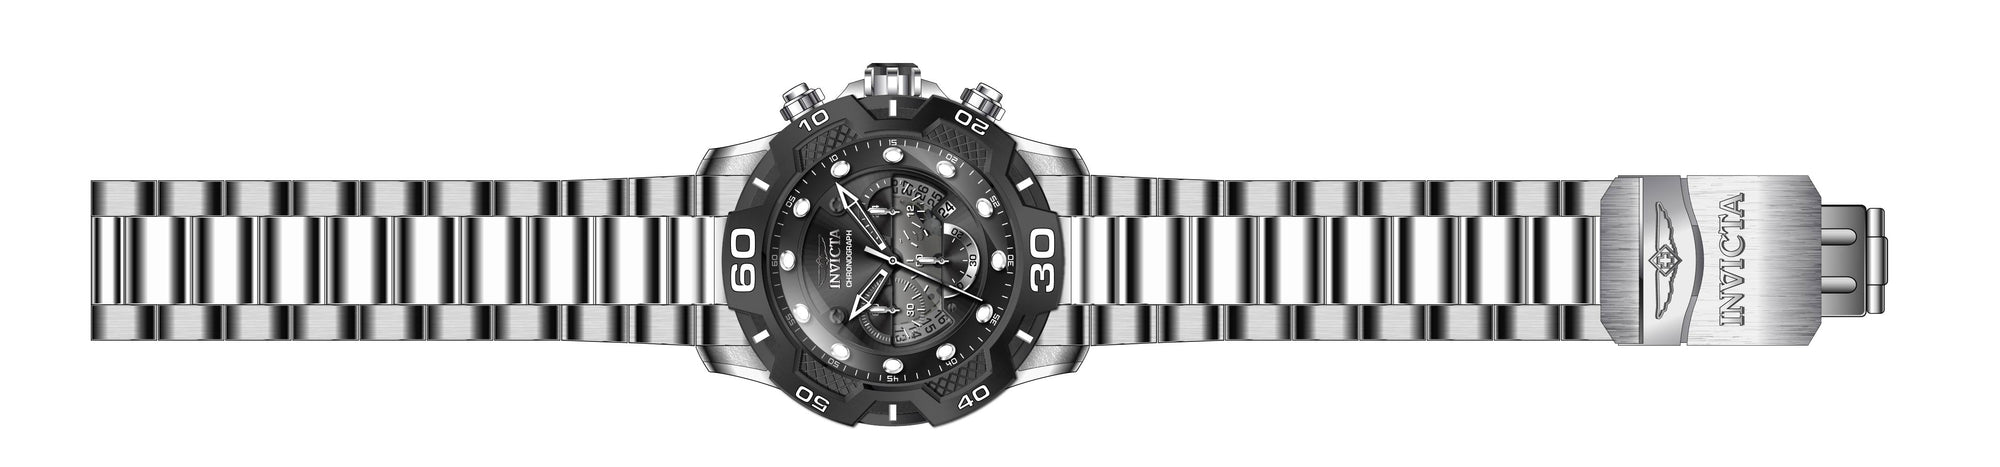 Band for Invicta Speedway Men 36686